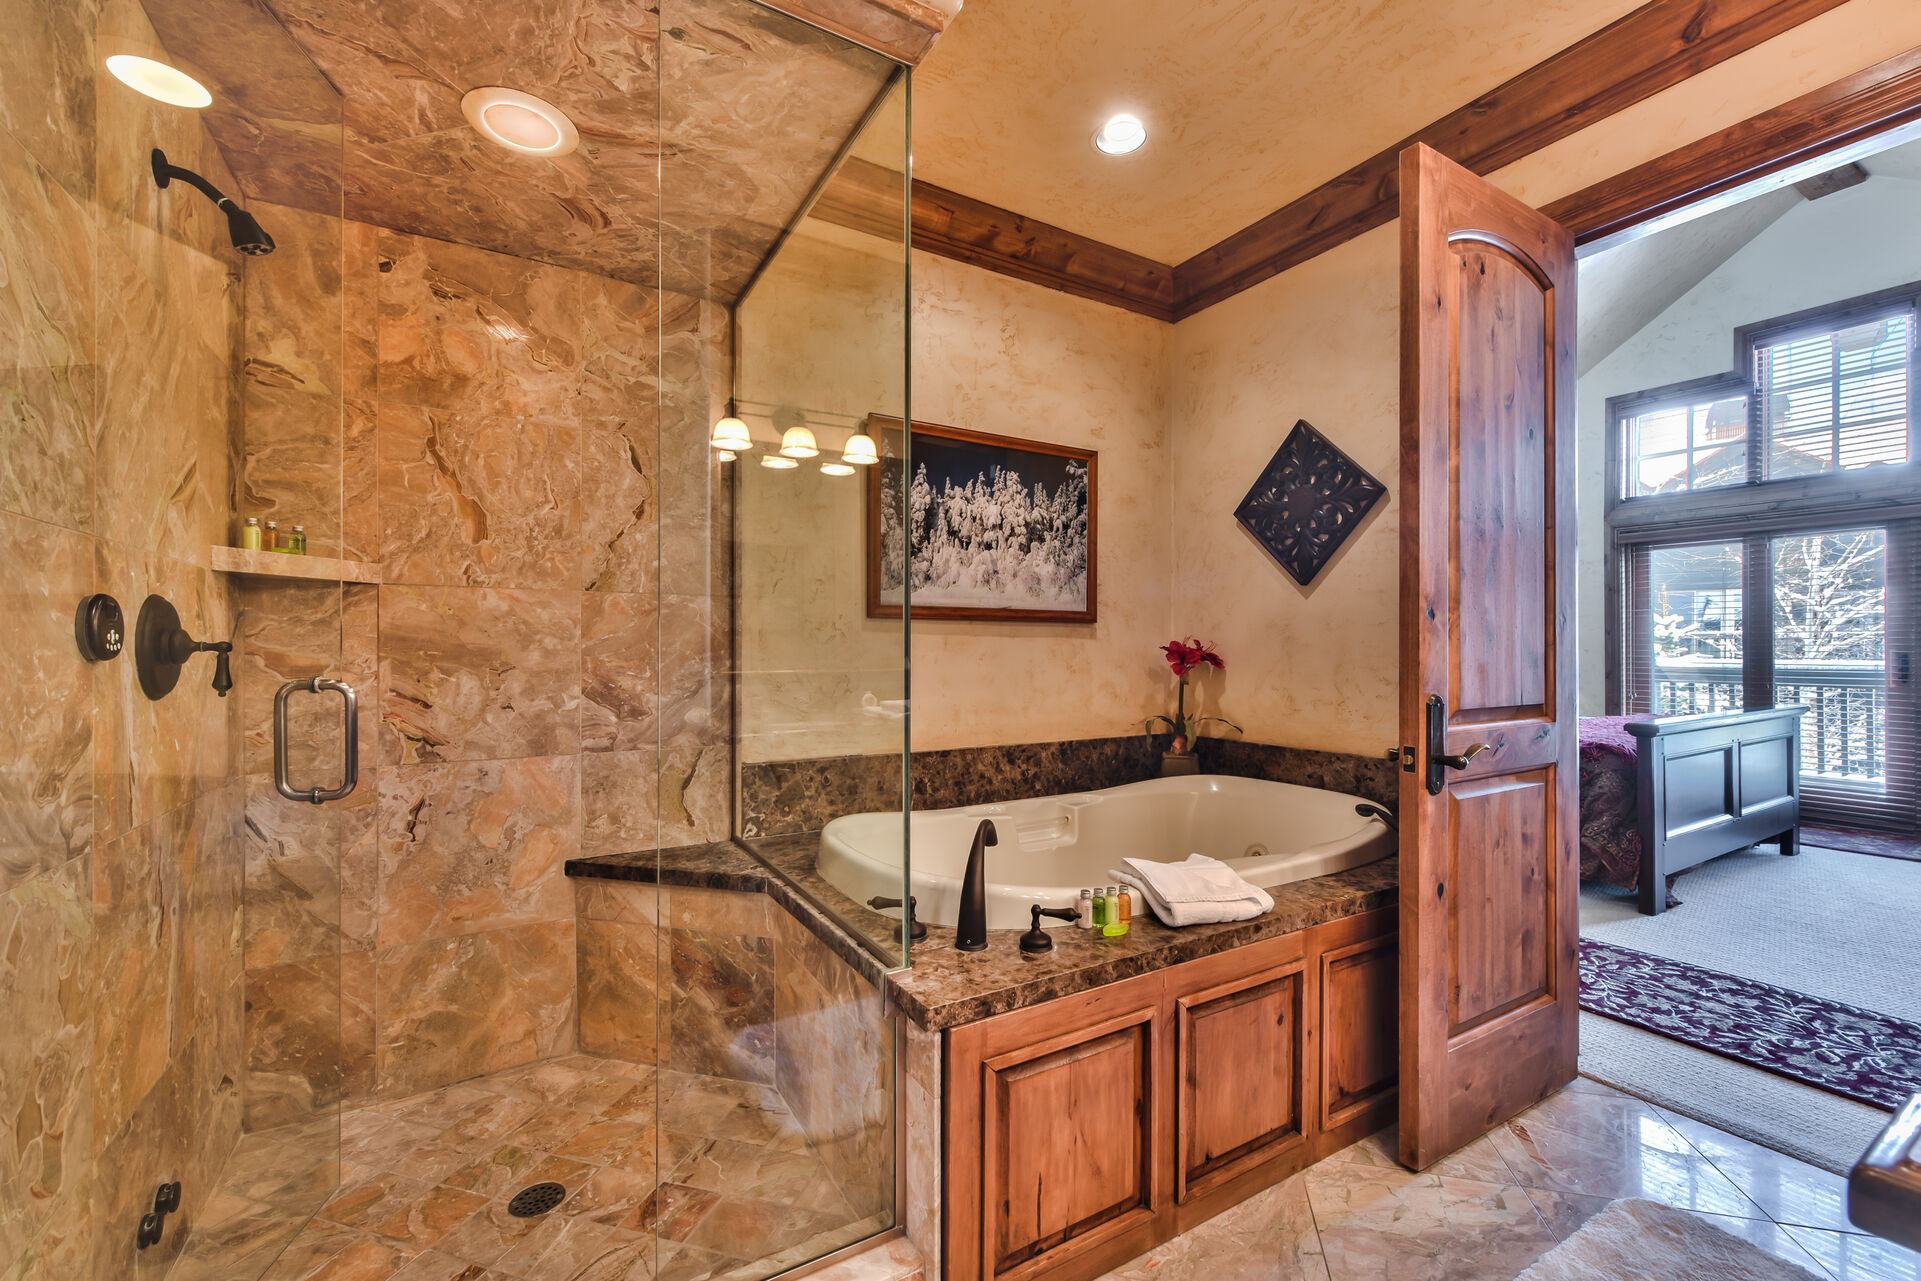 Grand Master Bath with a Steam Shower and Jetted Tub